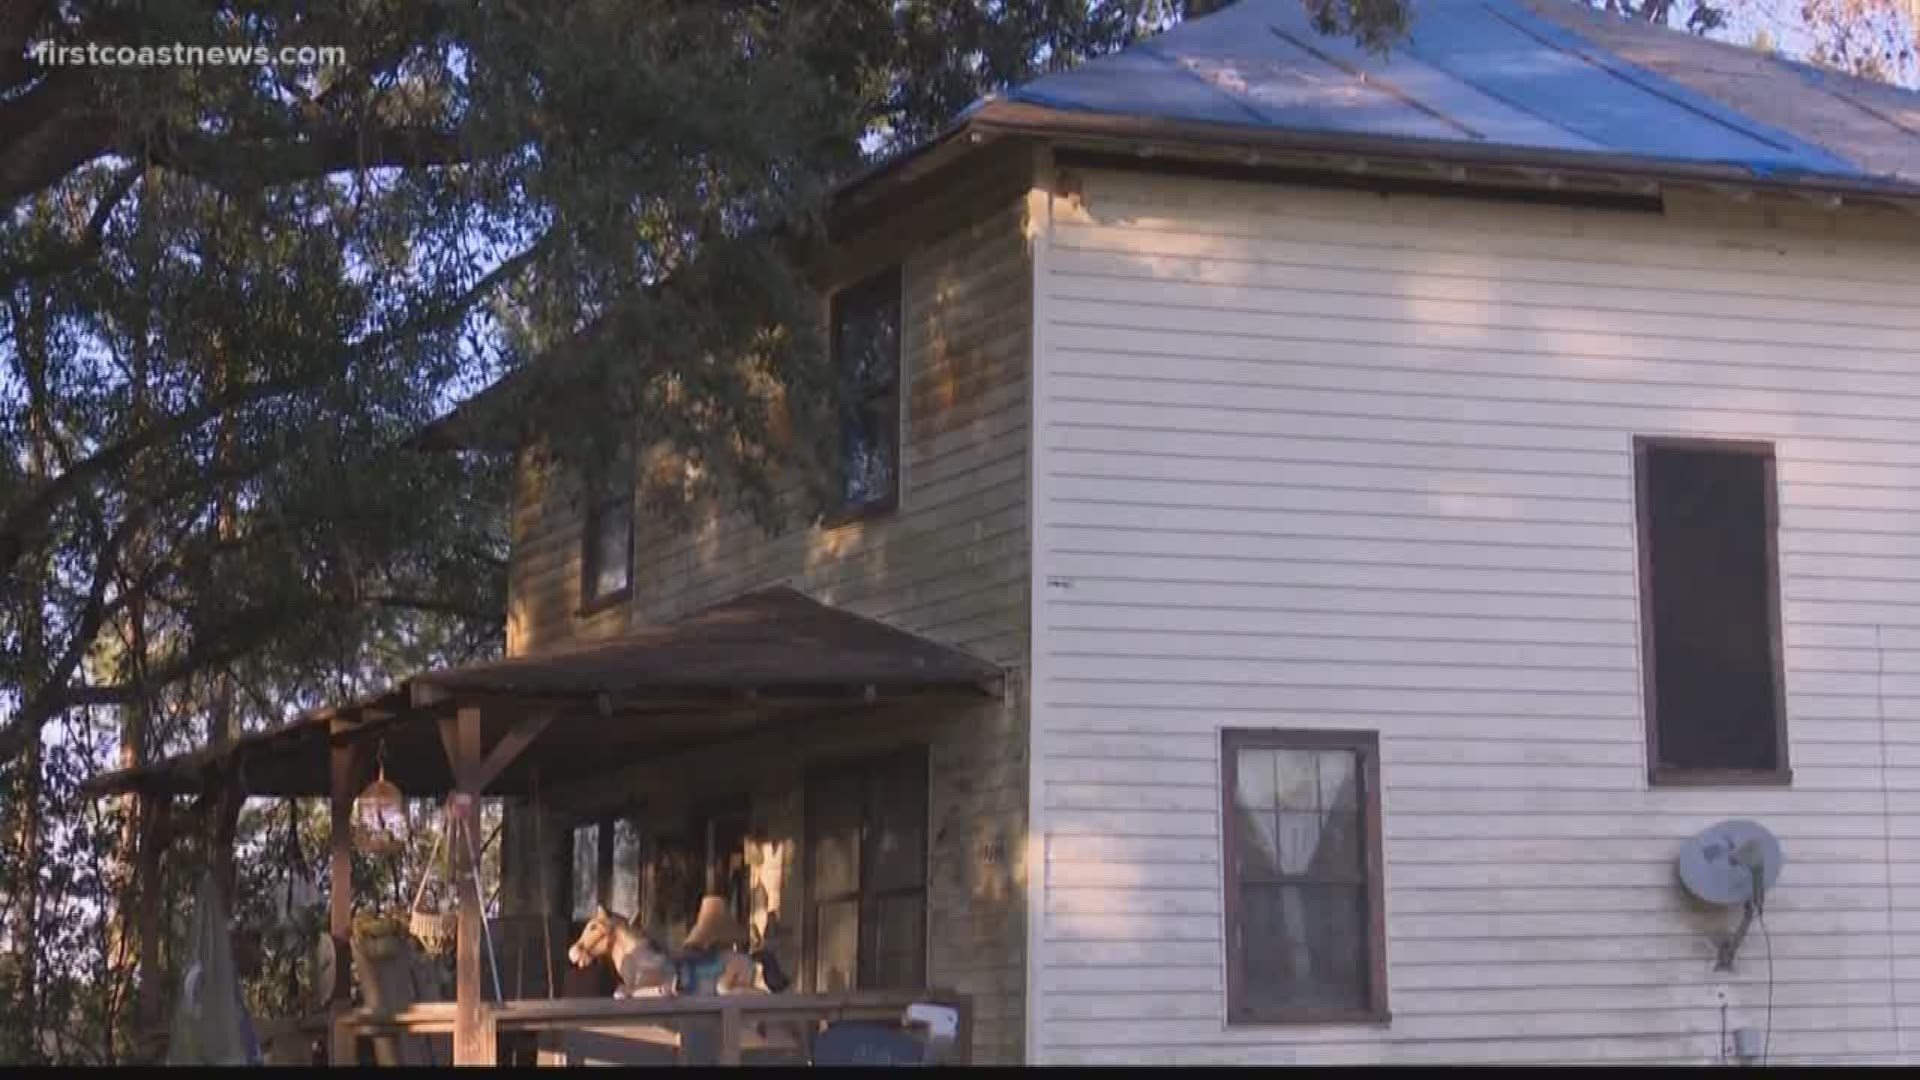 The Degolyer's roof was destroyed and they haven’t been able to get it fixed. After their story aired on FCN a local non-profit decided to step up and help.